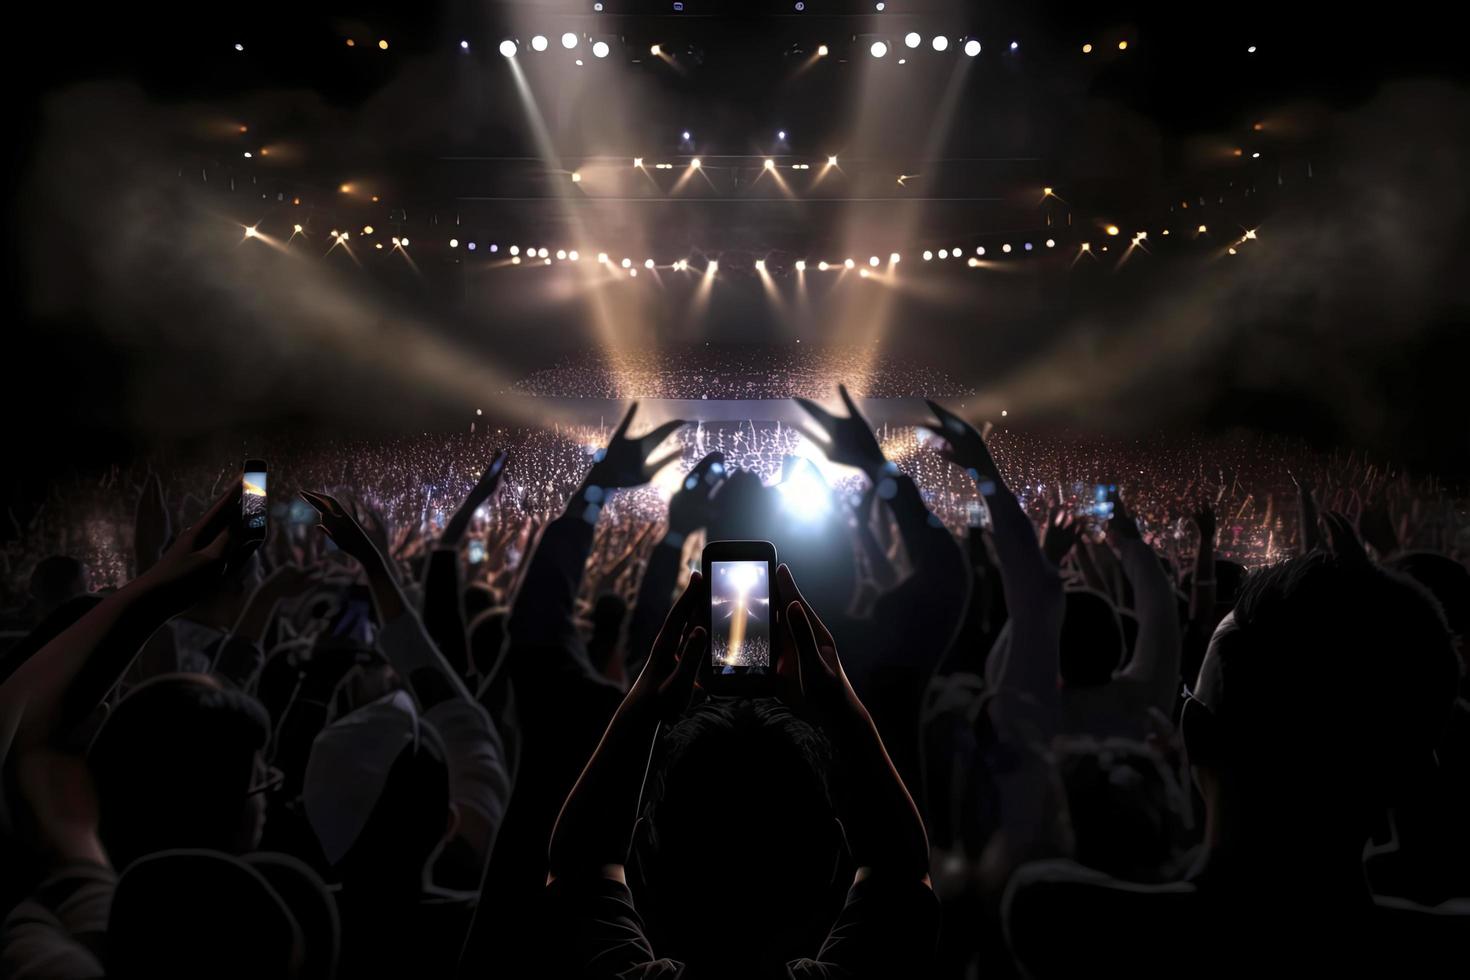 Future of crowded concert hall on stage with scene stage lights, rock show performance photo